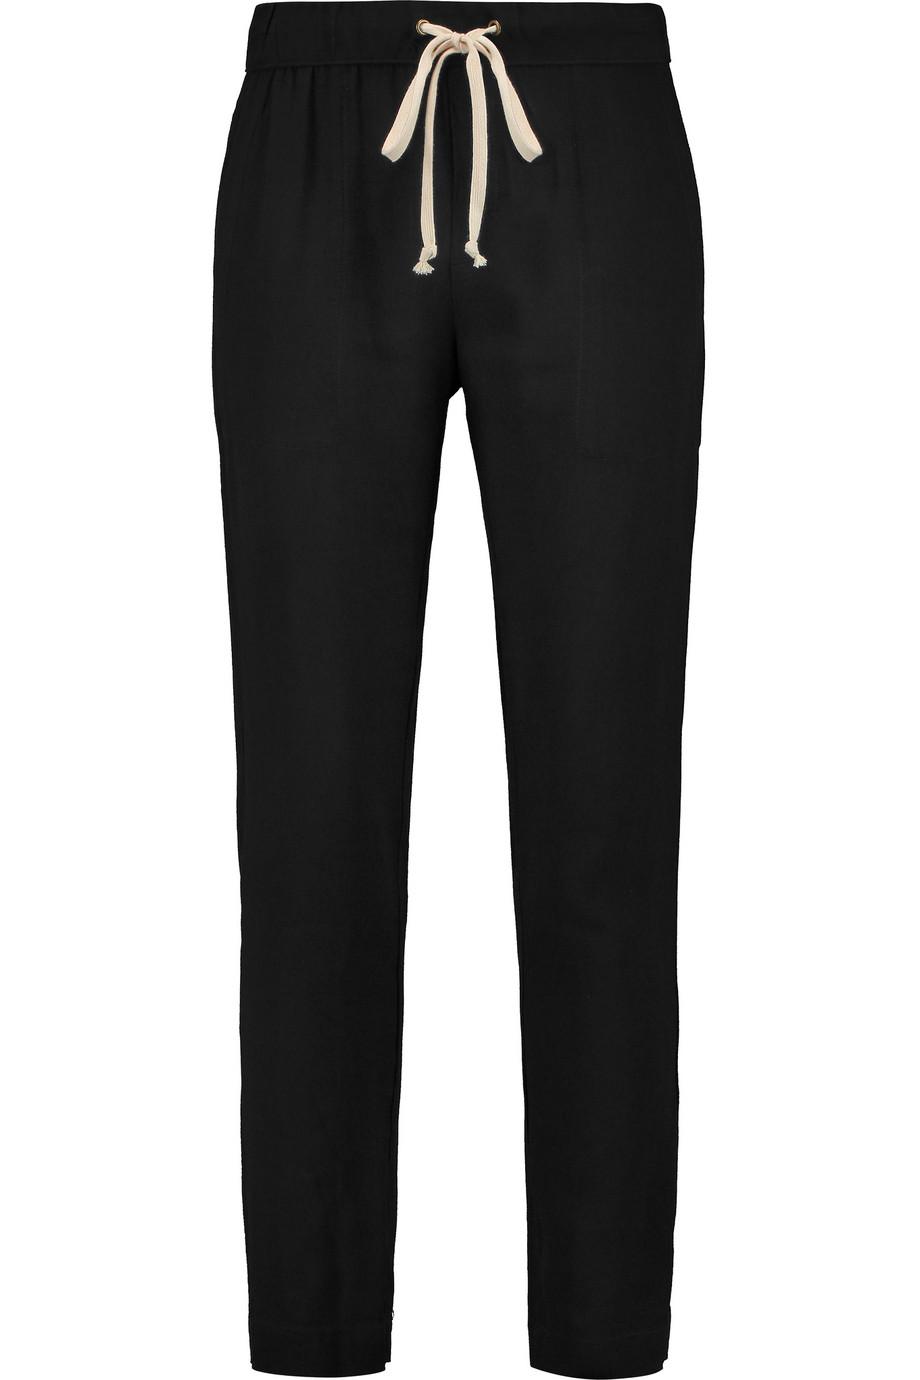 Enza Costa Crepe Tapered Pants | ModeSens